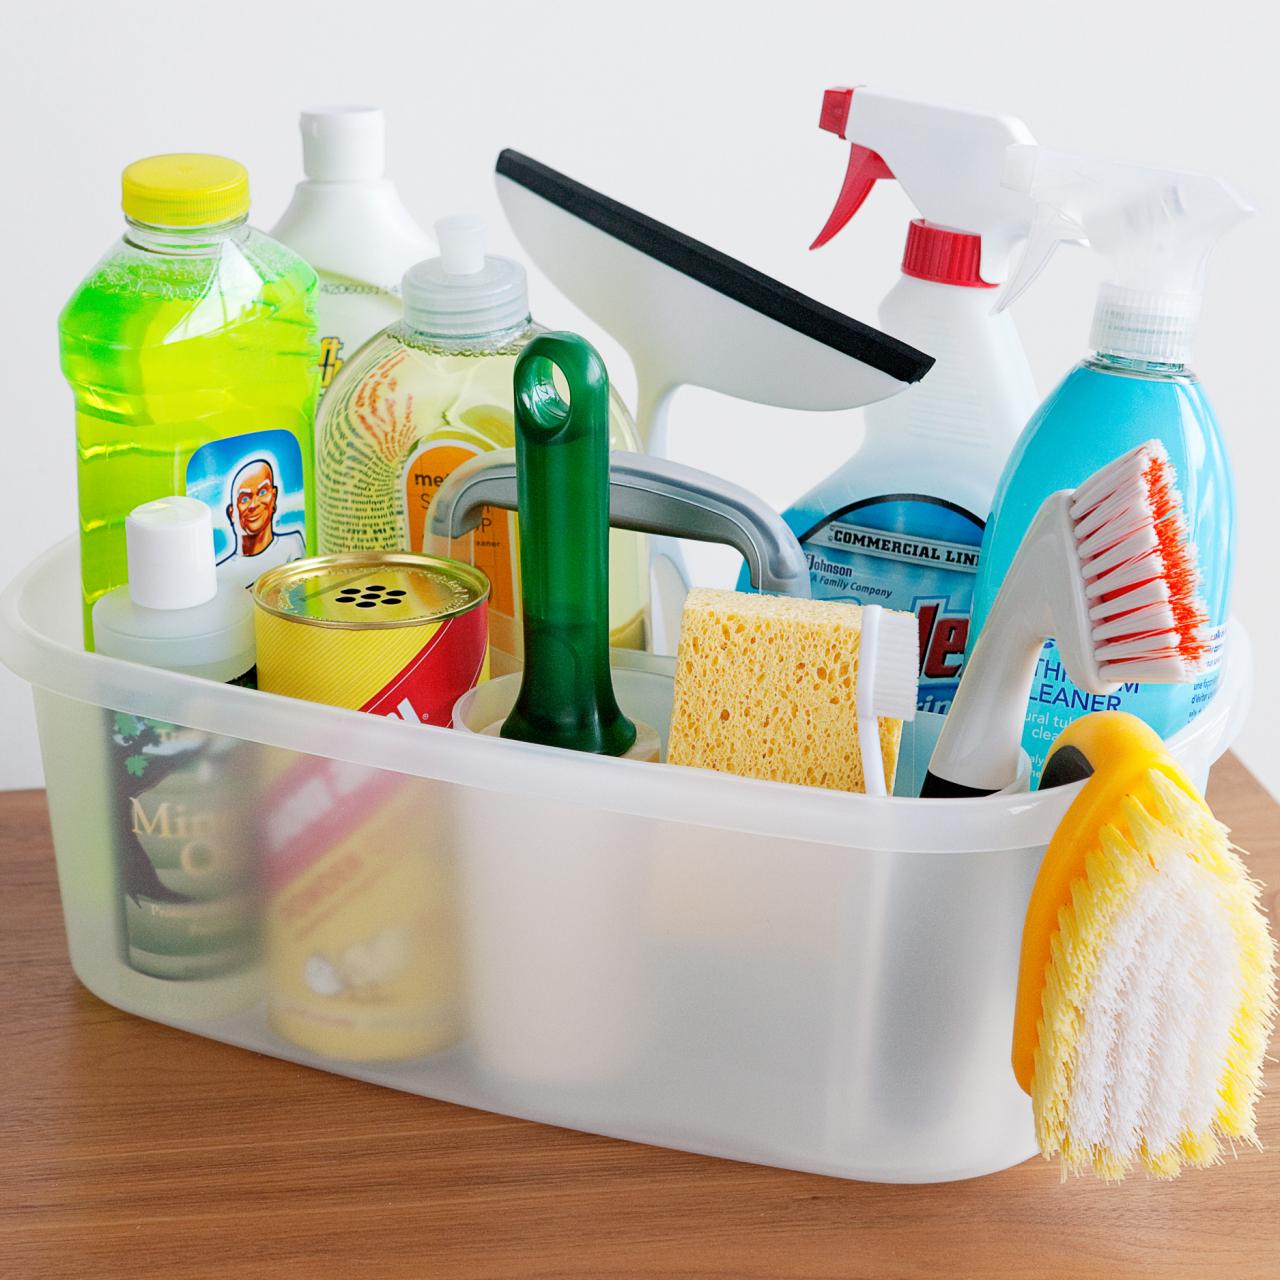 Housekeeping Material List & Cleaning Products List